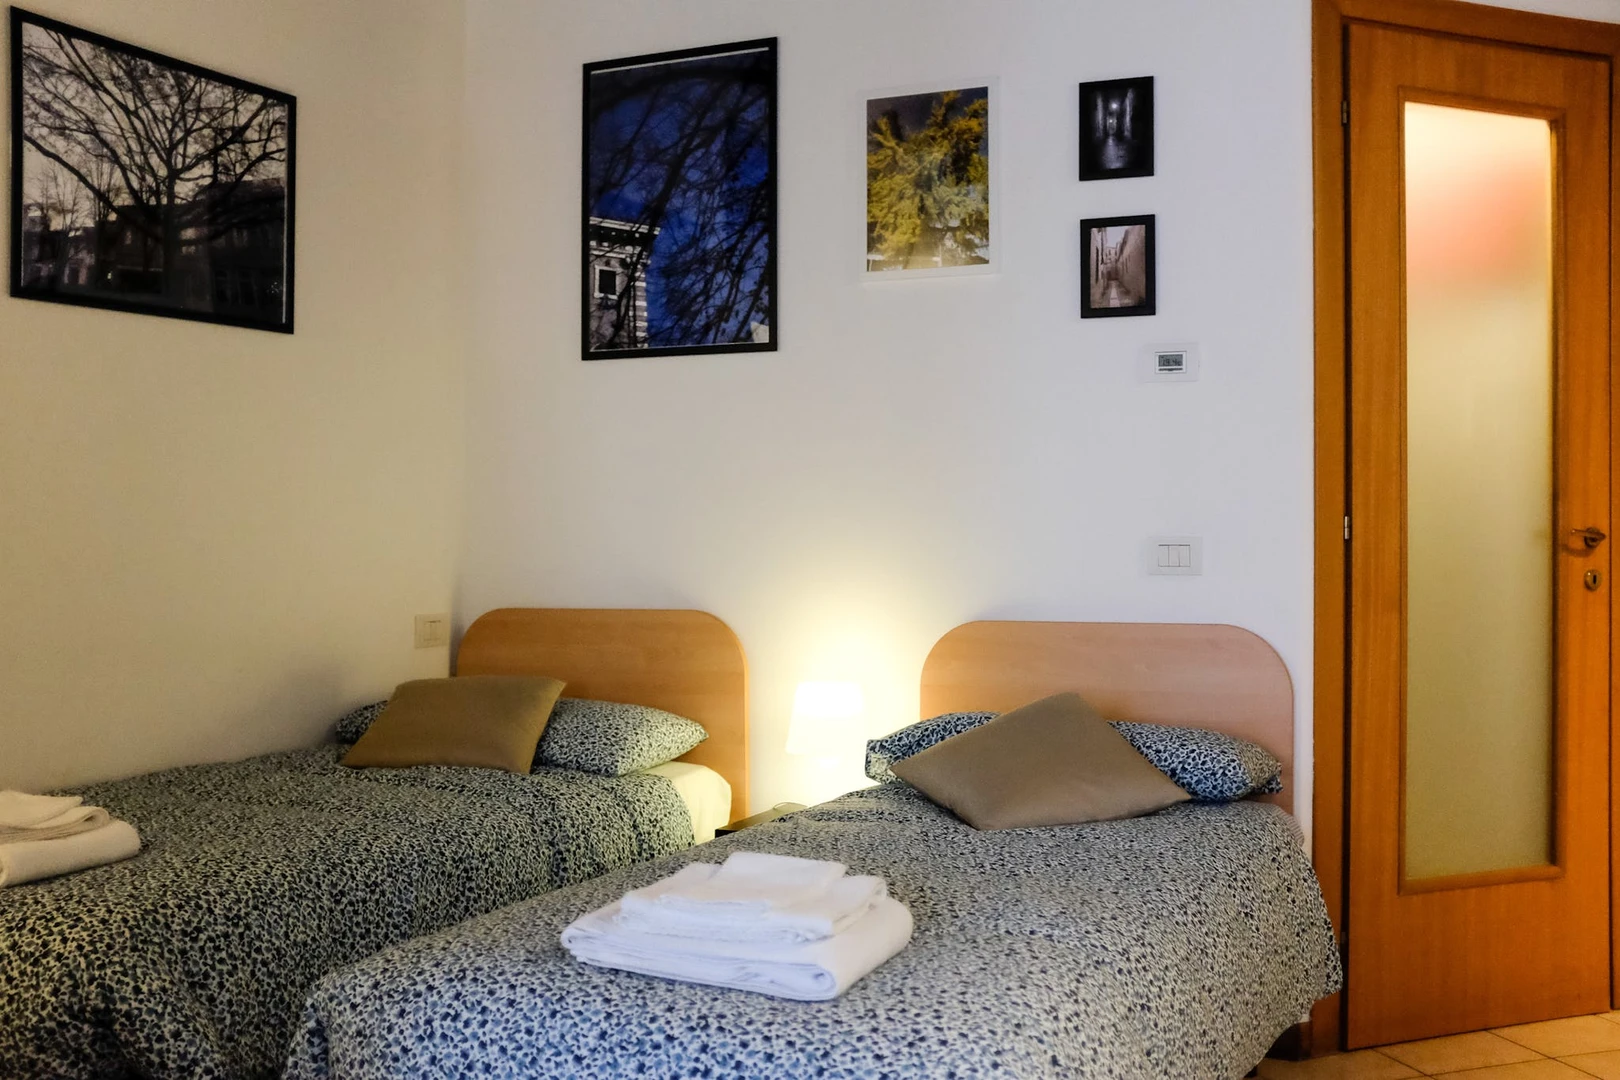 Accommodation with 3 bedrooms in Forlì